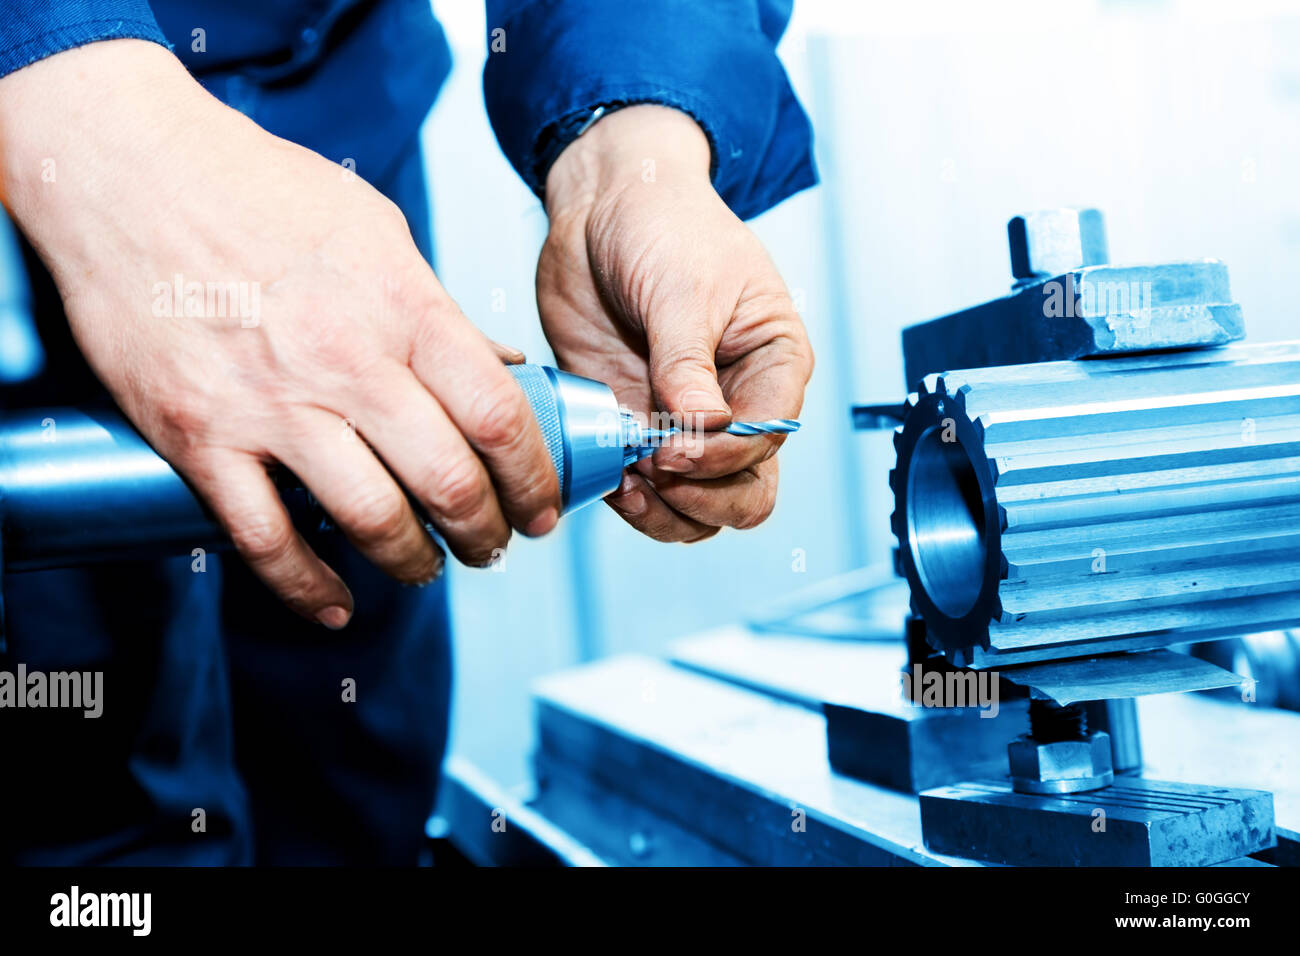 Man working on drilling and boring machine. Industry Stock Photo